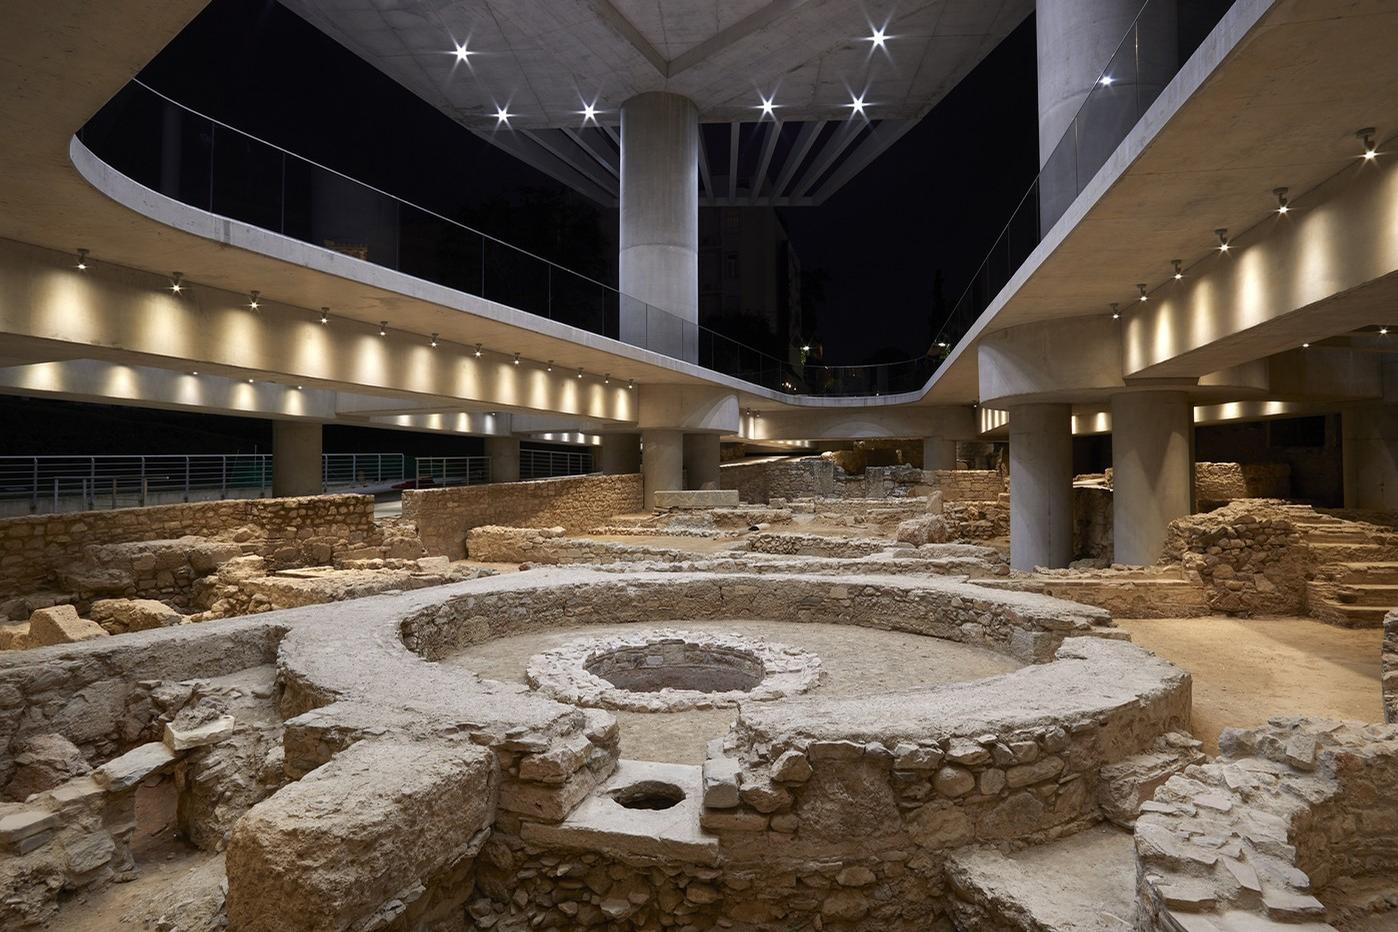 The ancient urban settlement has been excavated over the last ten years / Giorgos Vitsaropoulos